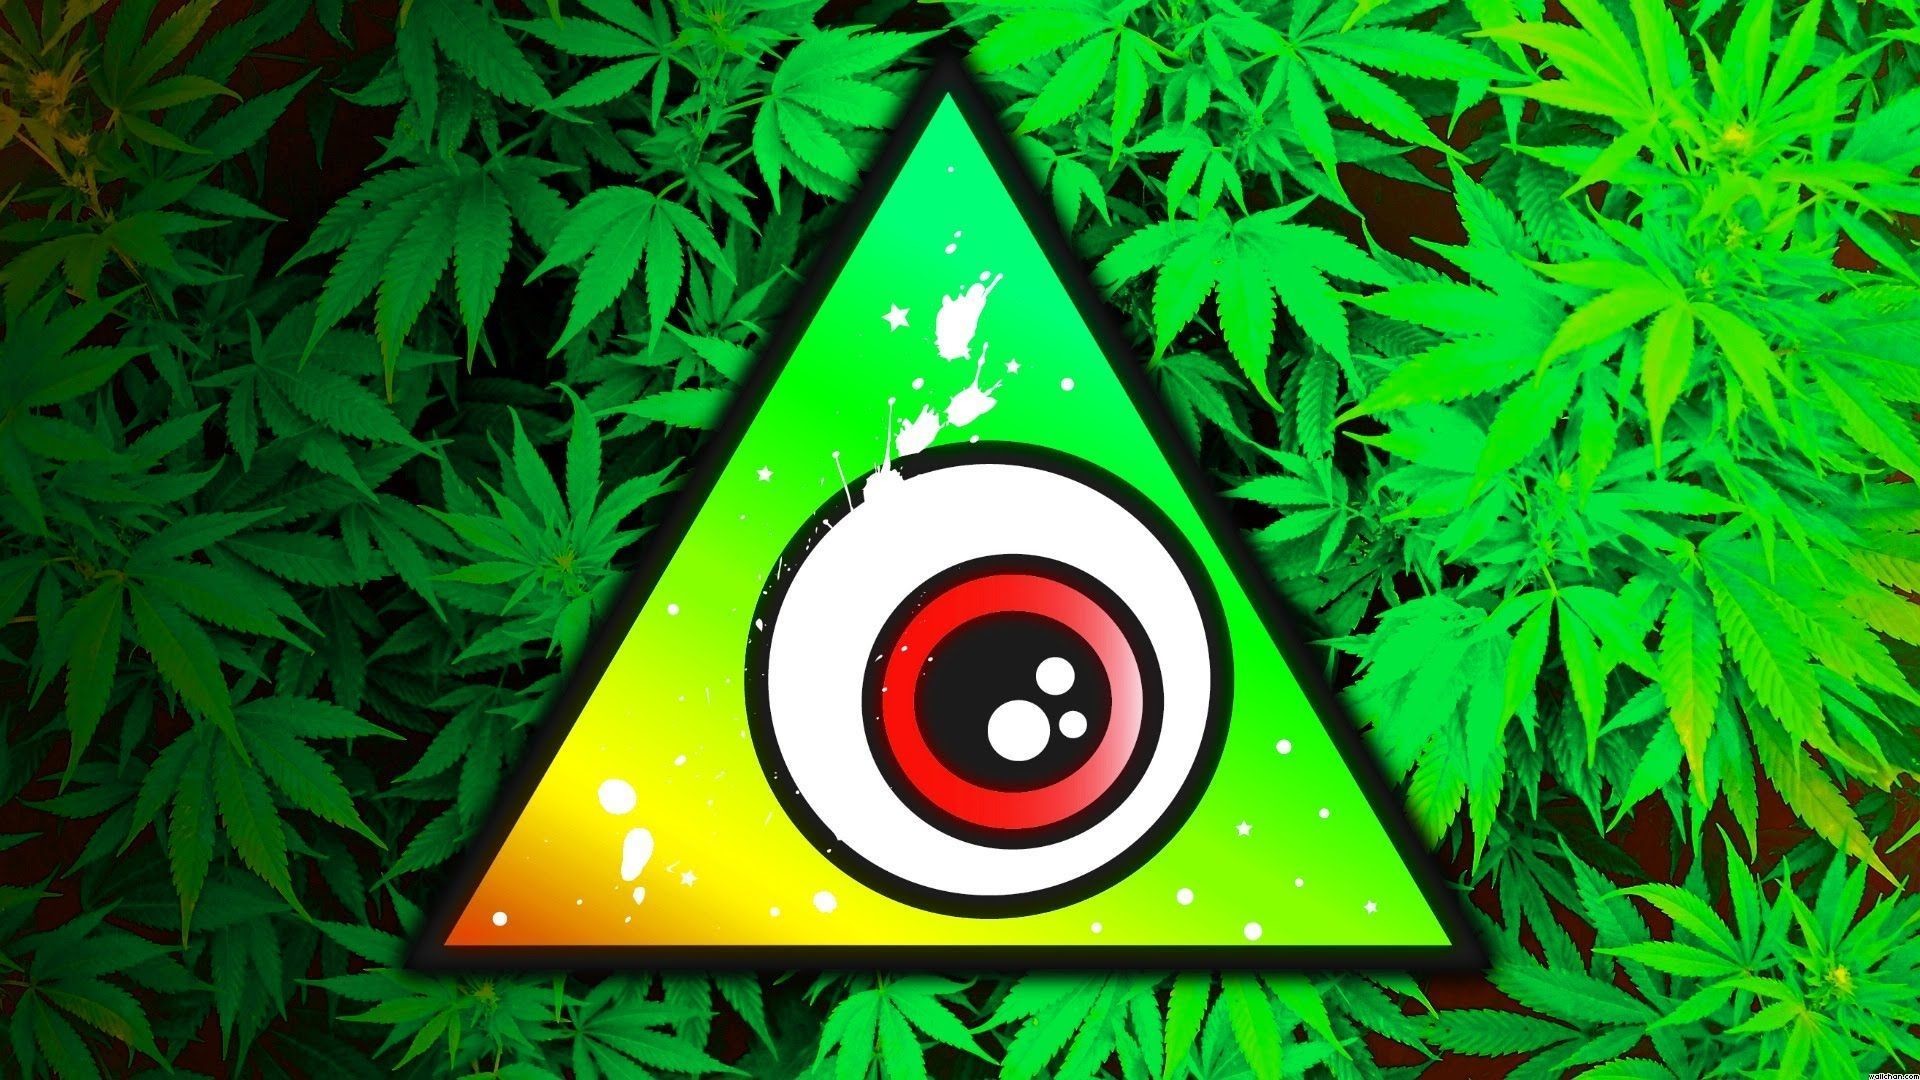 Cool collections of trippy stoner wallpapers gallery plus â juegosrev for desktop laptop and mobiles here you can download more than million â